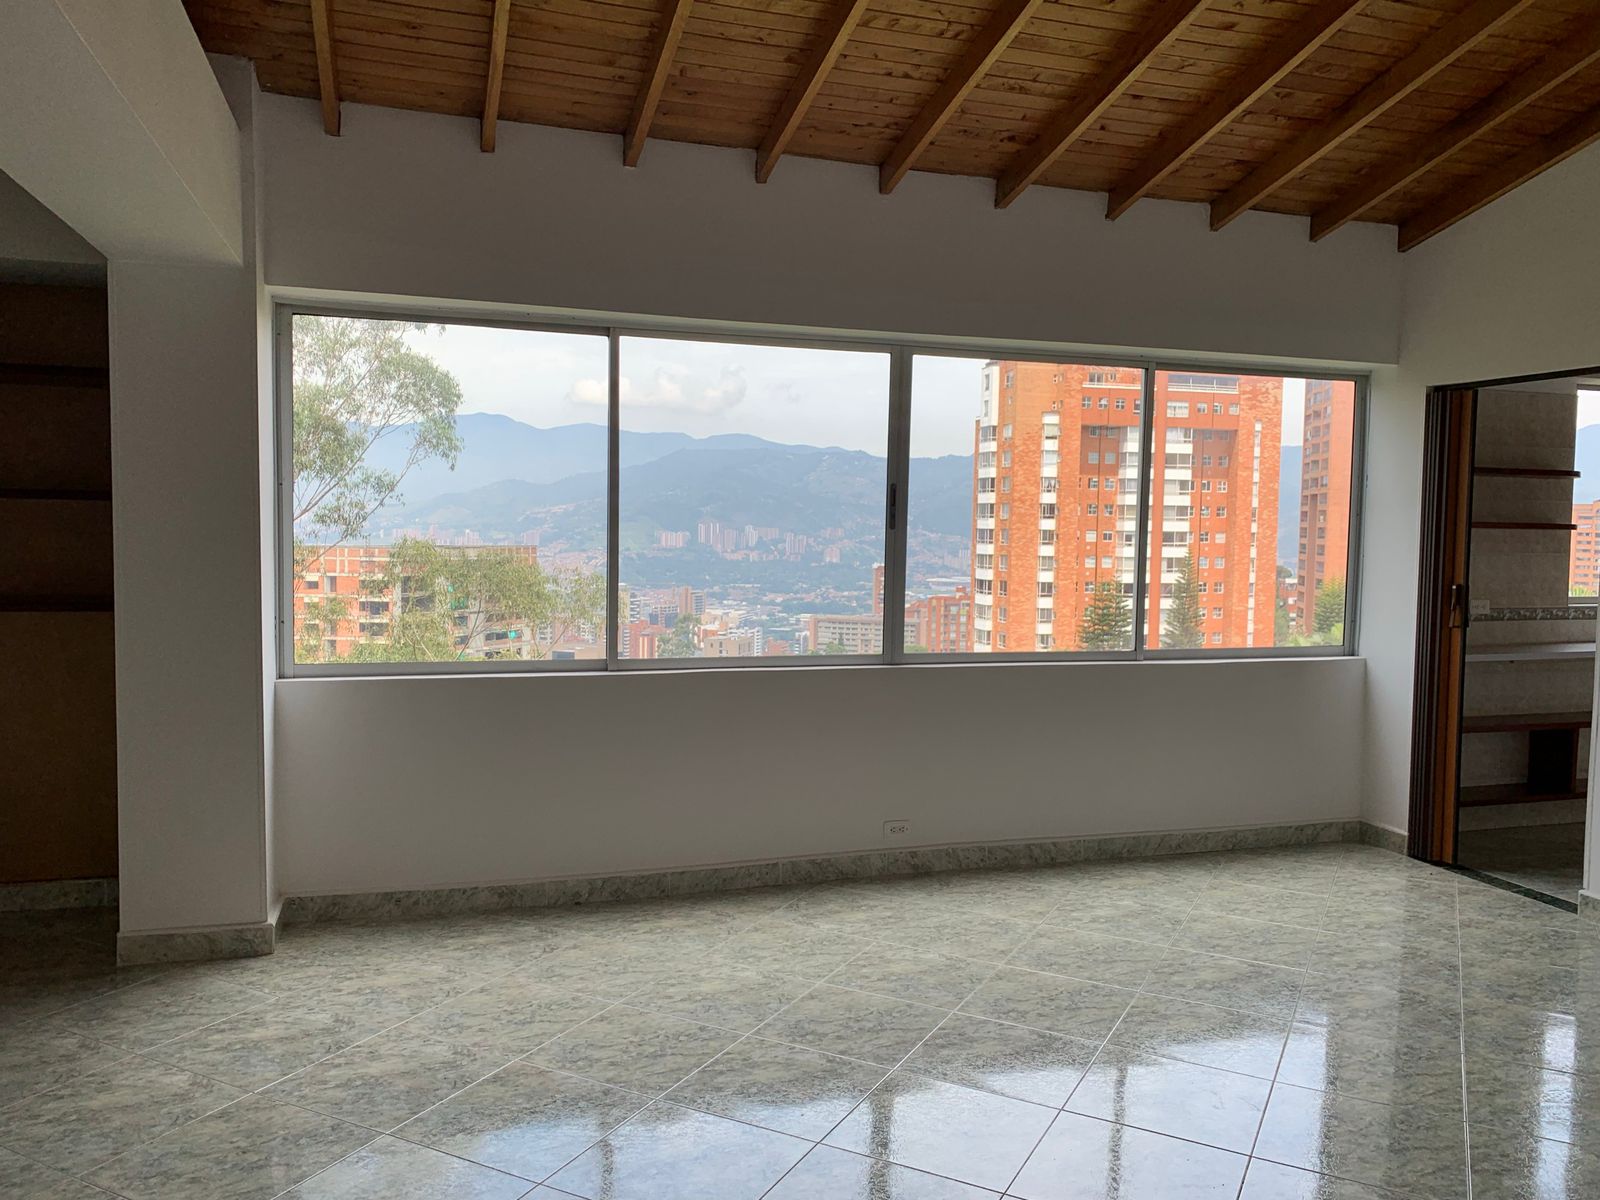 Under 100K USD 1BR El Poblado Penthouse With Low Carrying Costs and Scenic Views